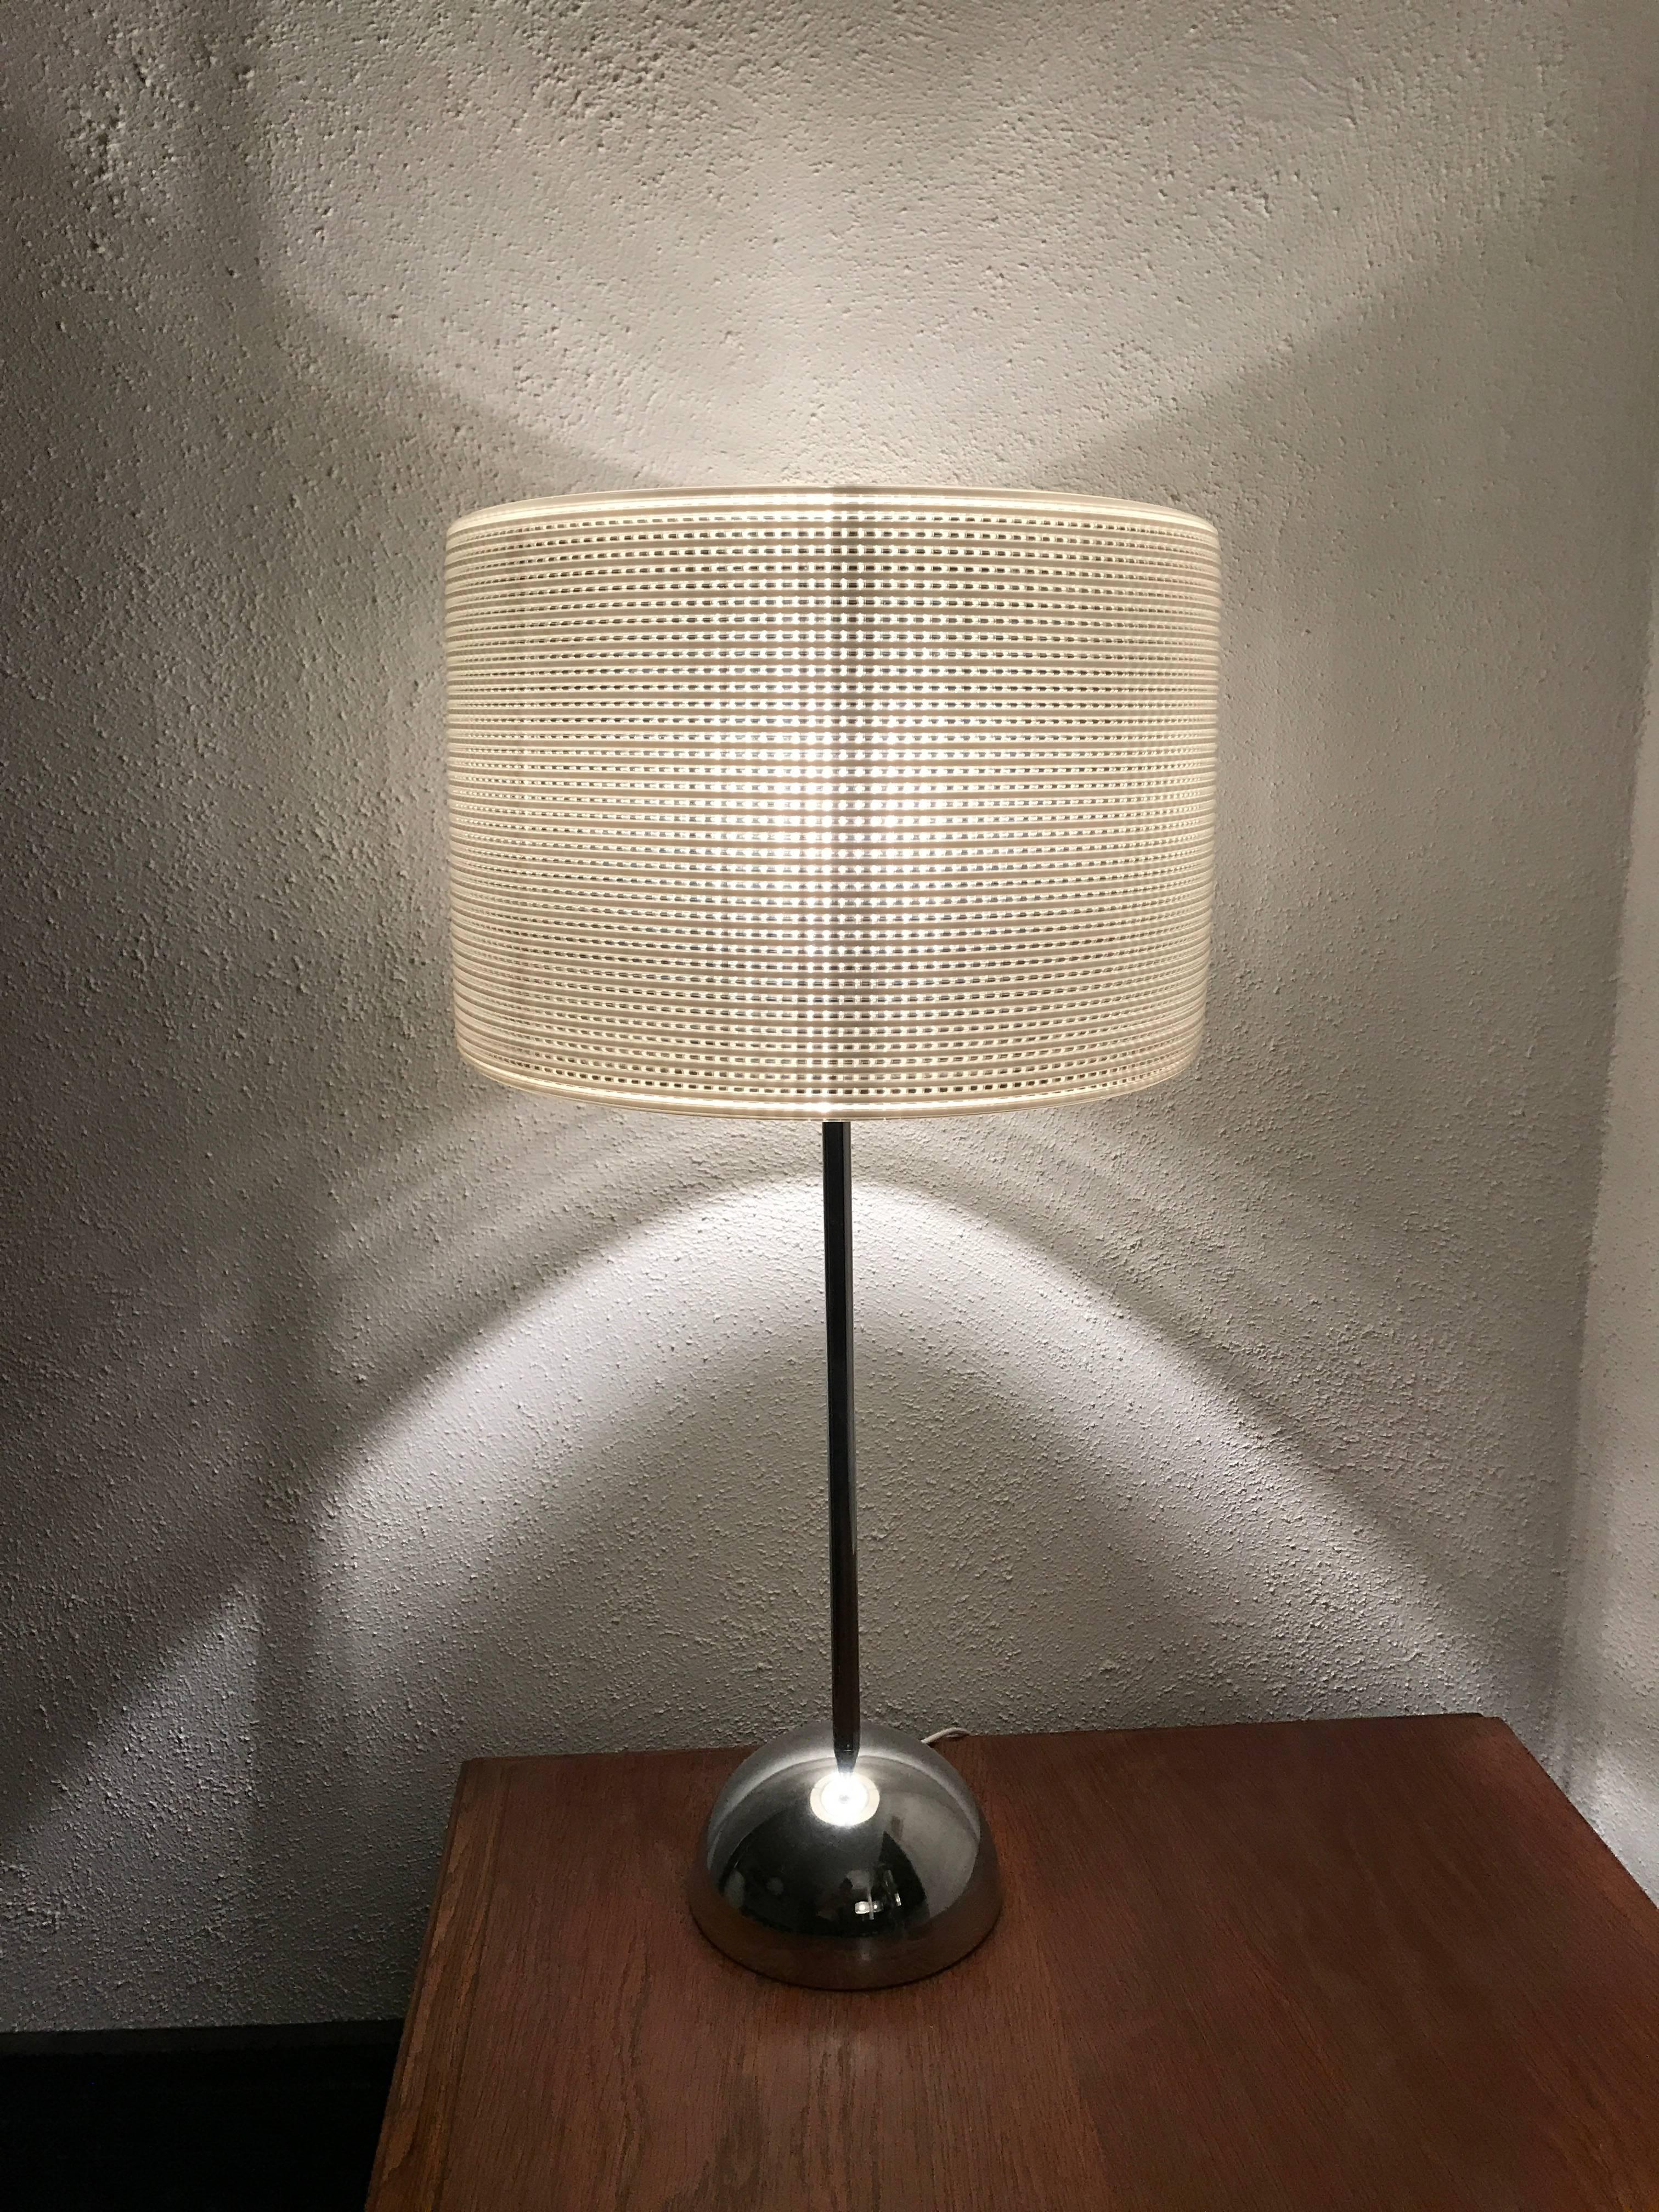 Large very rare 1960 Swedish Bergboms pair of chromed steel and plastic table lamps
Very rare table lamps made of plastic and chromed steel by Bergboms in the early 1960s. They are in a fantastic condition with original shades that gives a